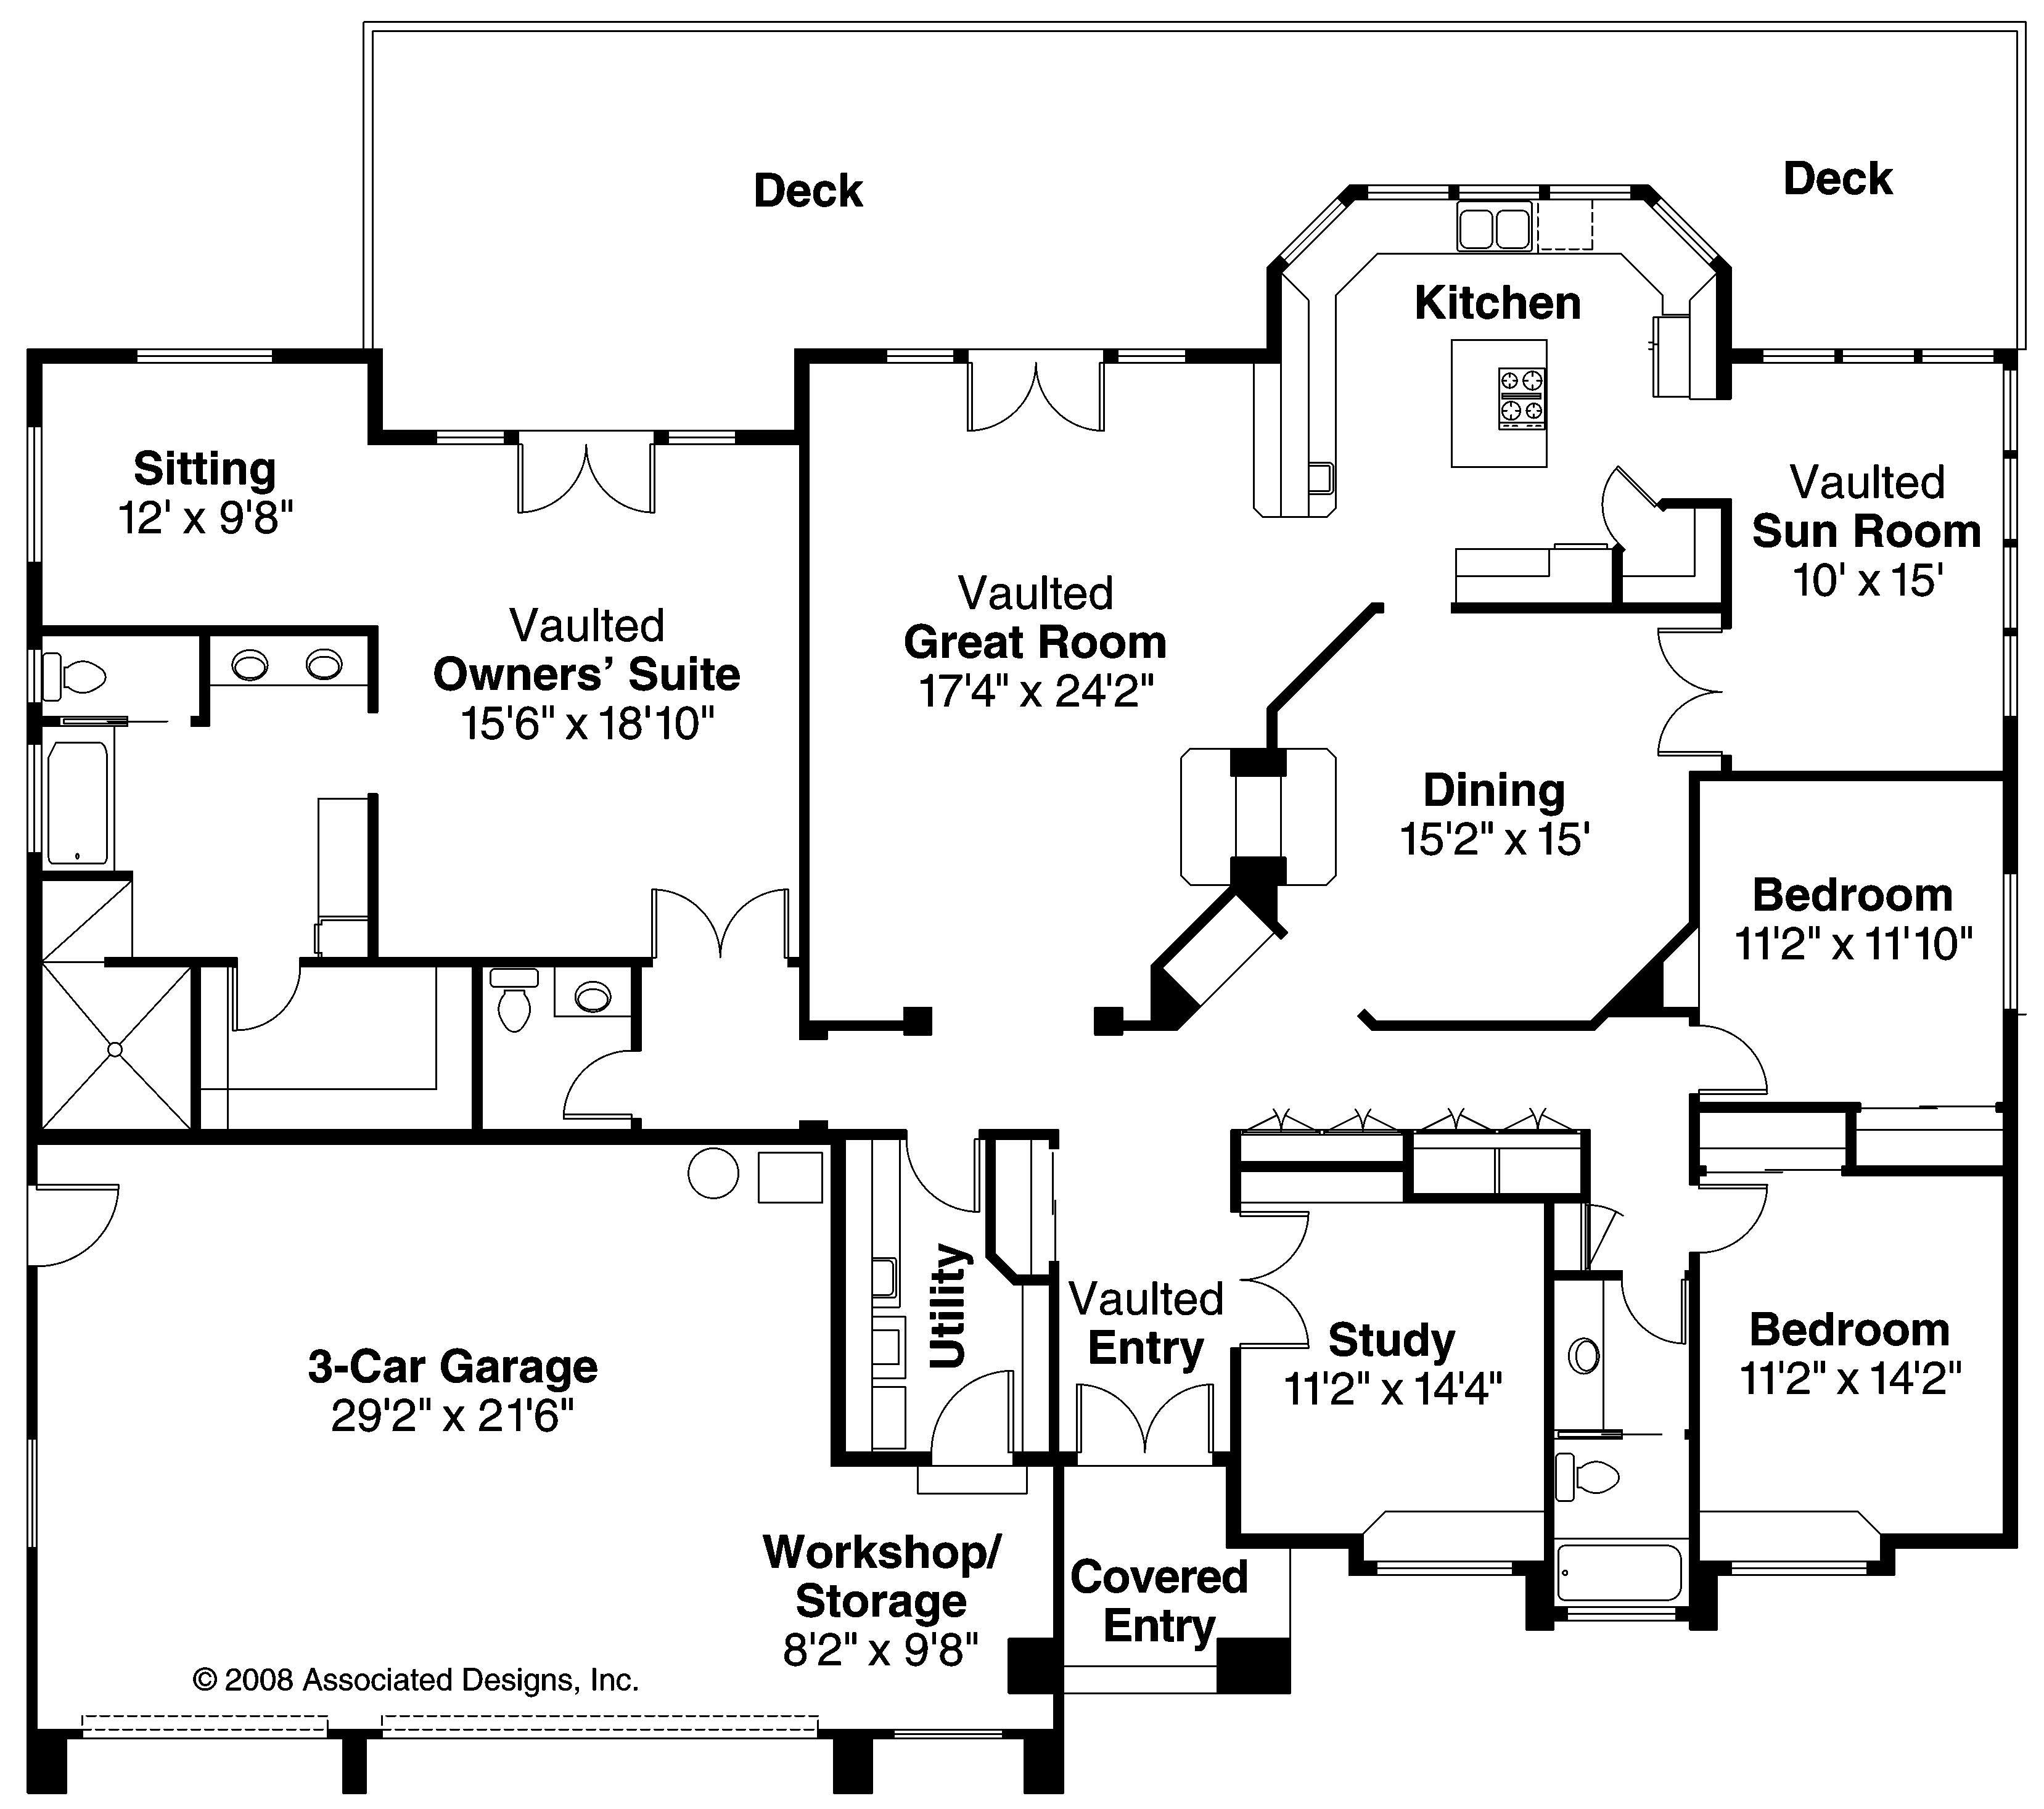 Craftsman Home with 3 Bdrms, 2810 Sq Ft Floor Plan 1081112